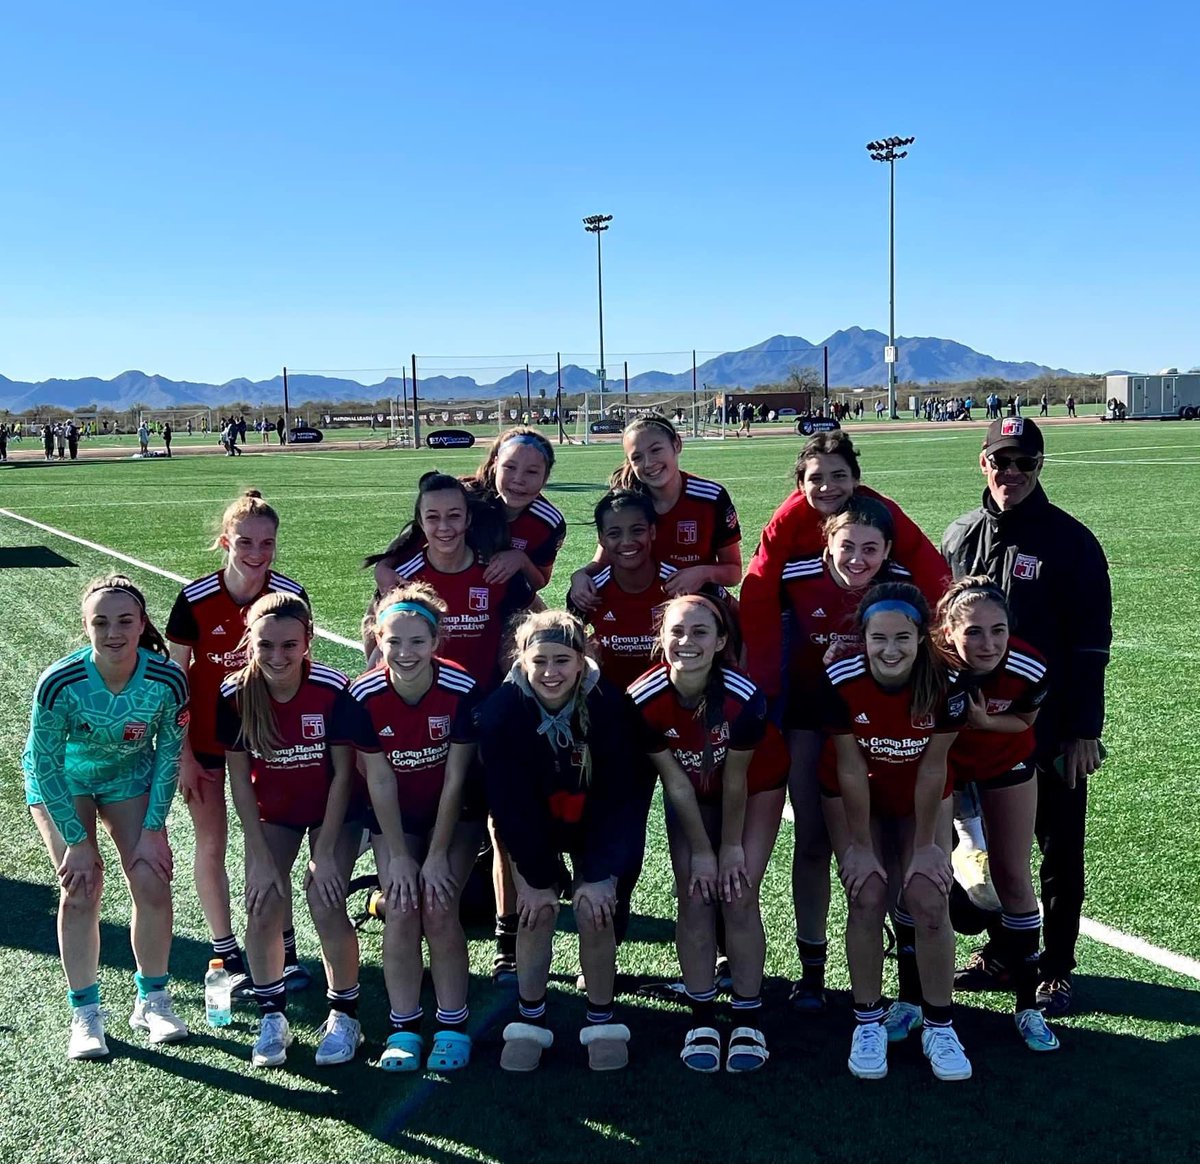 Goodbye Mesa Arizona.  Great competition at the NL showcase and our team came to play! @ImYouthSoccer @NationalLeague @ImCollegeSoccer @Madison56ersSC